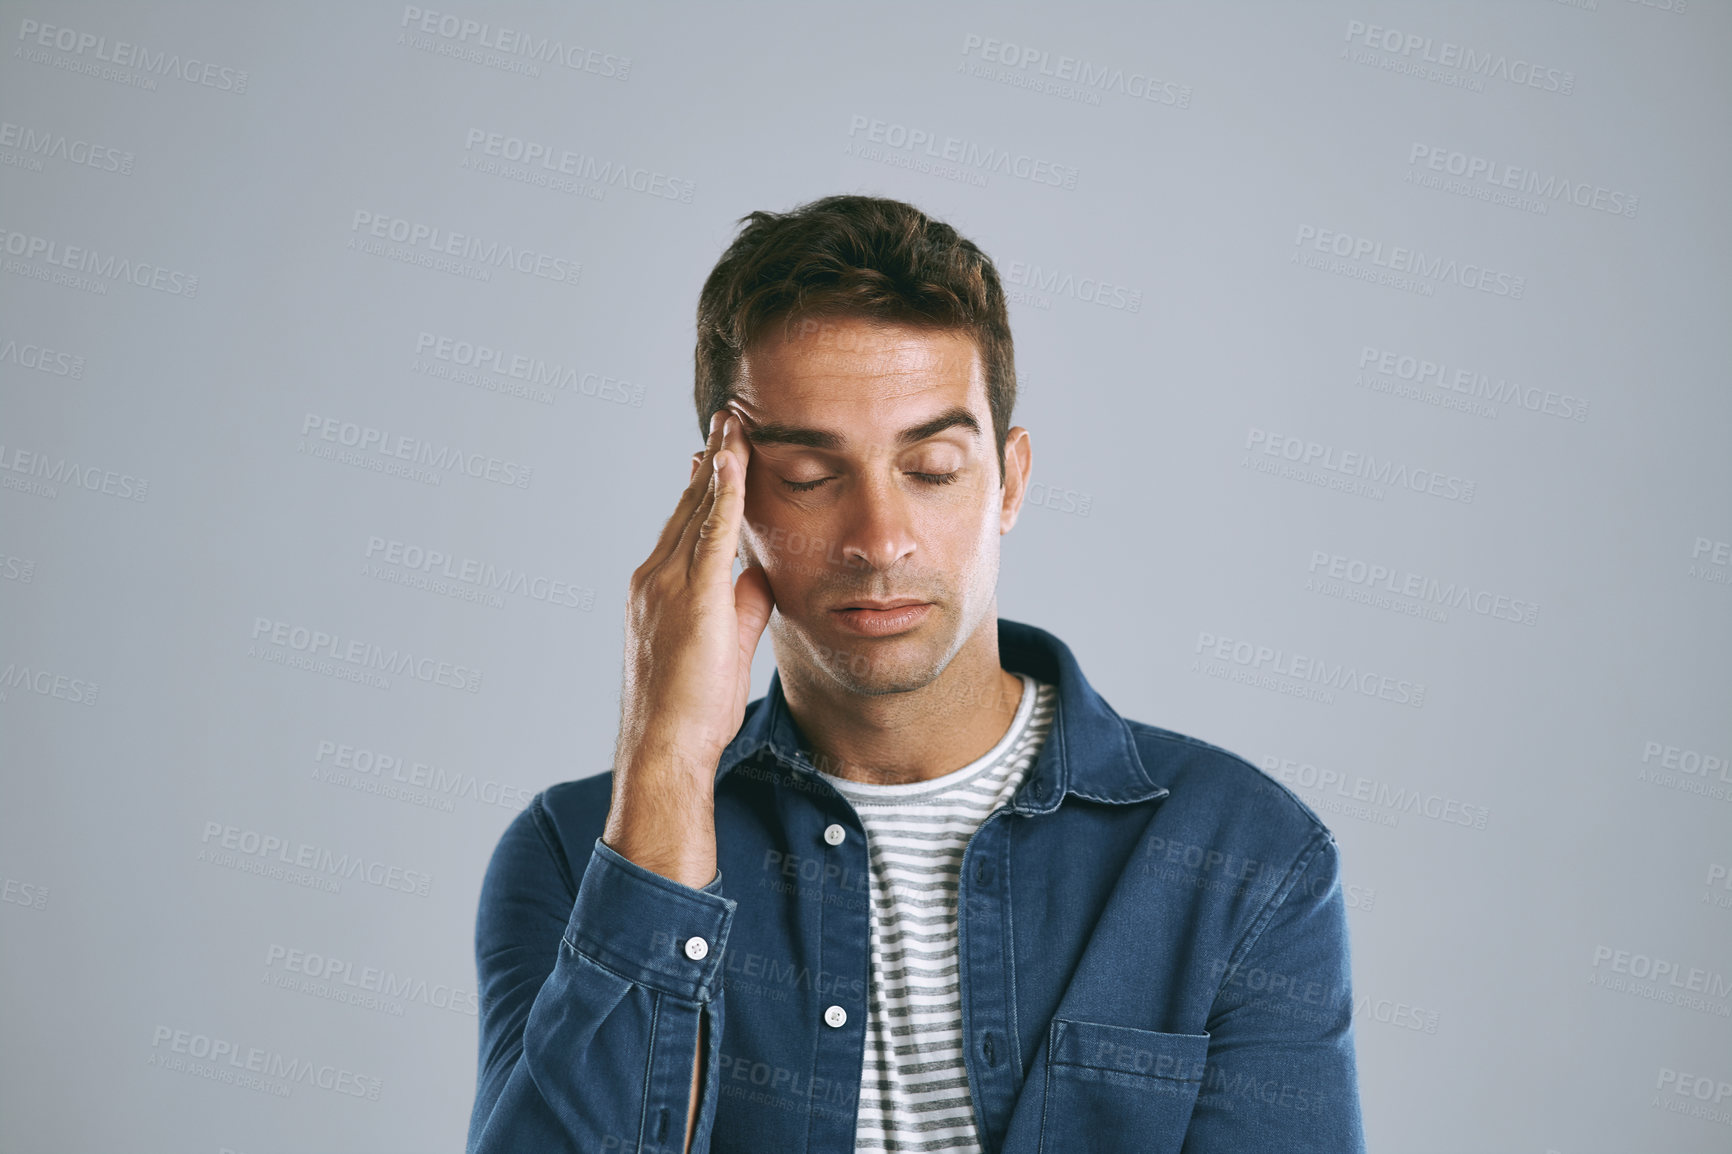 Buy stock photo Cropped shot of a man suffering from a headache against while posing against a grey background